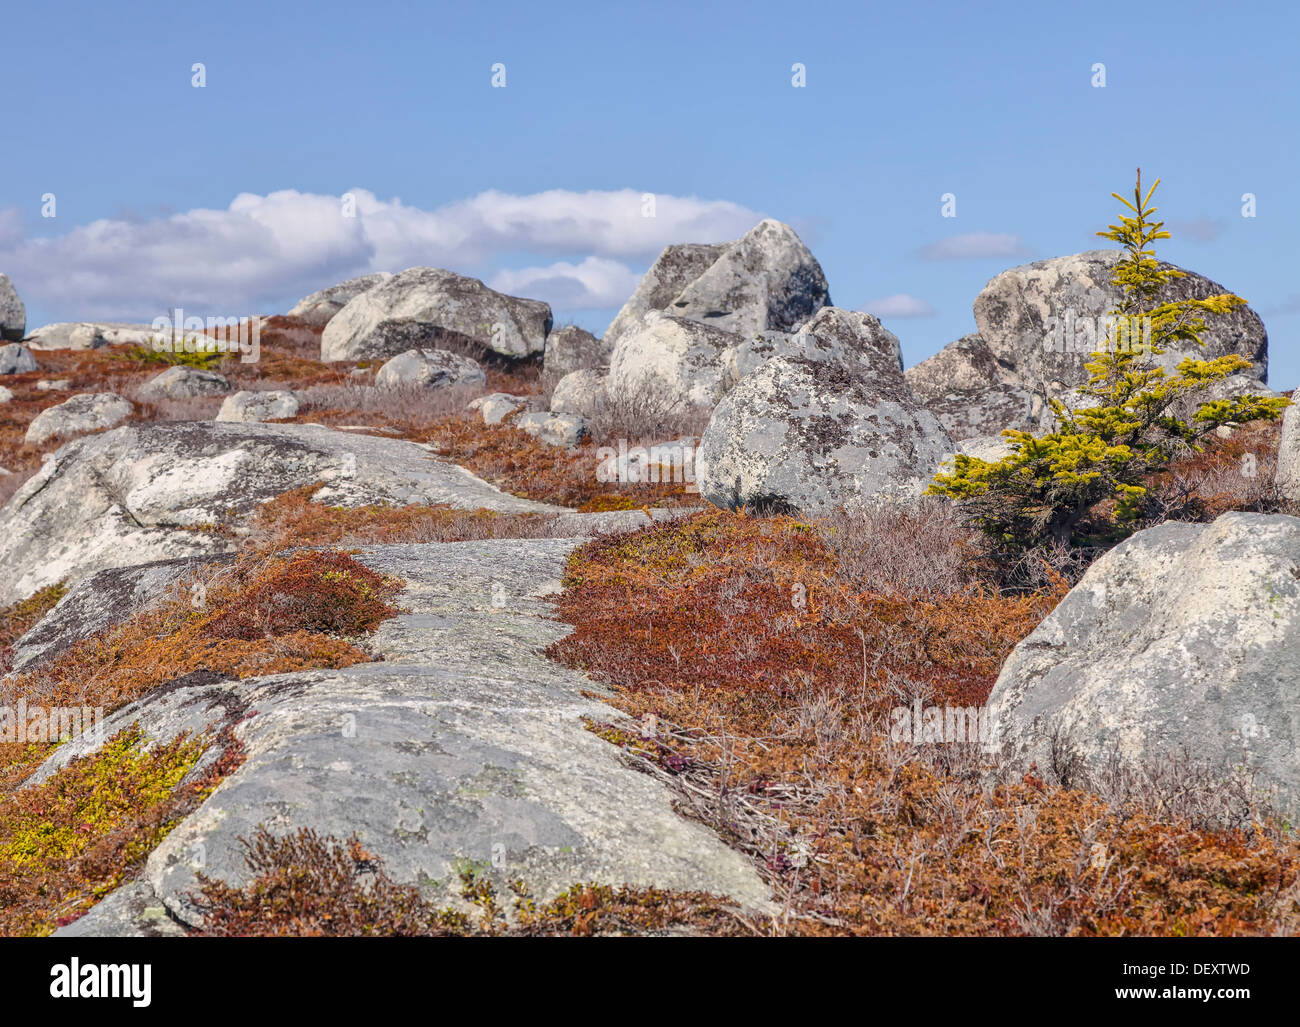 A rocky northern landscape with a fragile and threatened ecosystem. Stock Photo